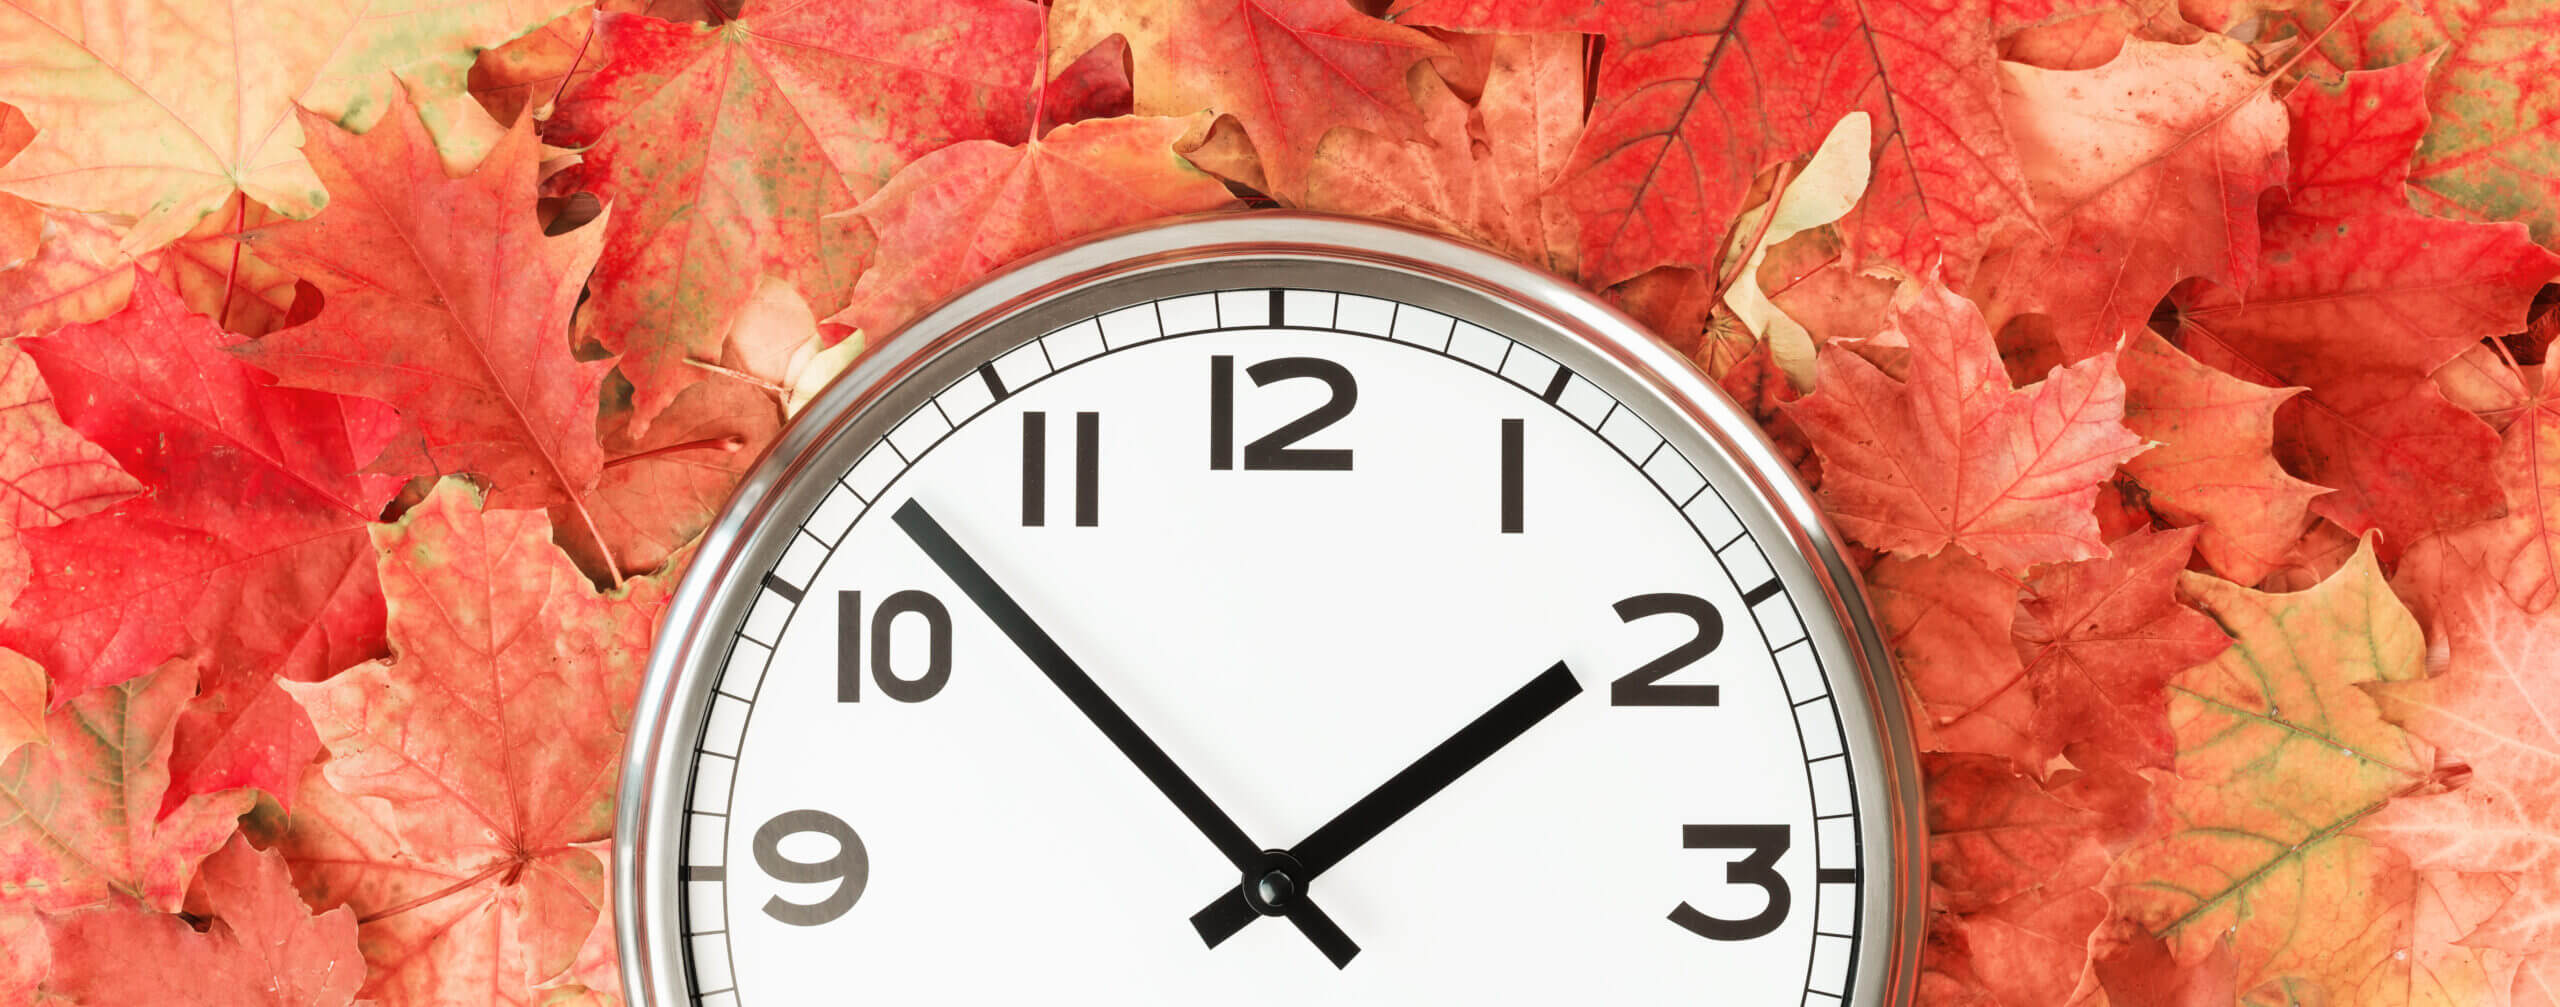 Daylight Savings Time: “Fall Back” Causes More Accidents?